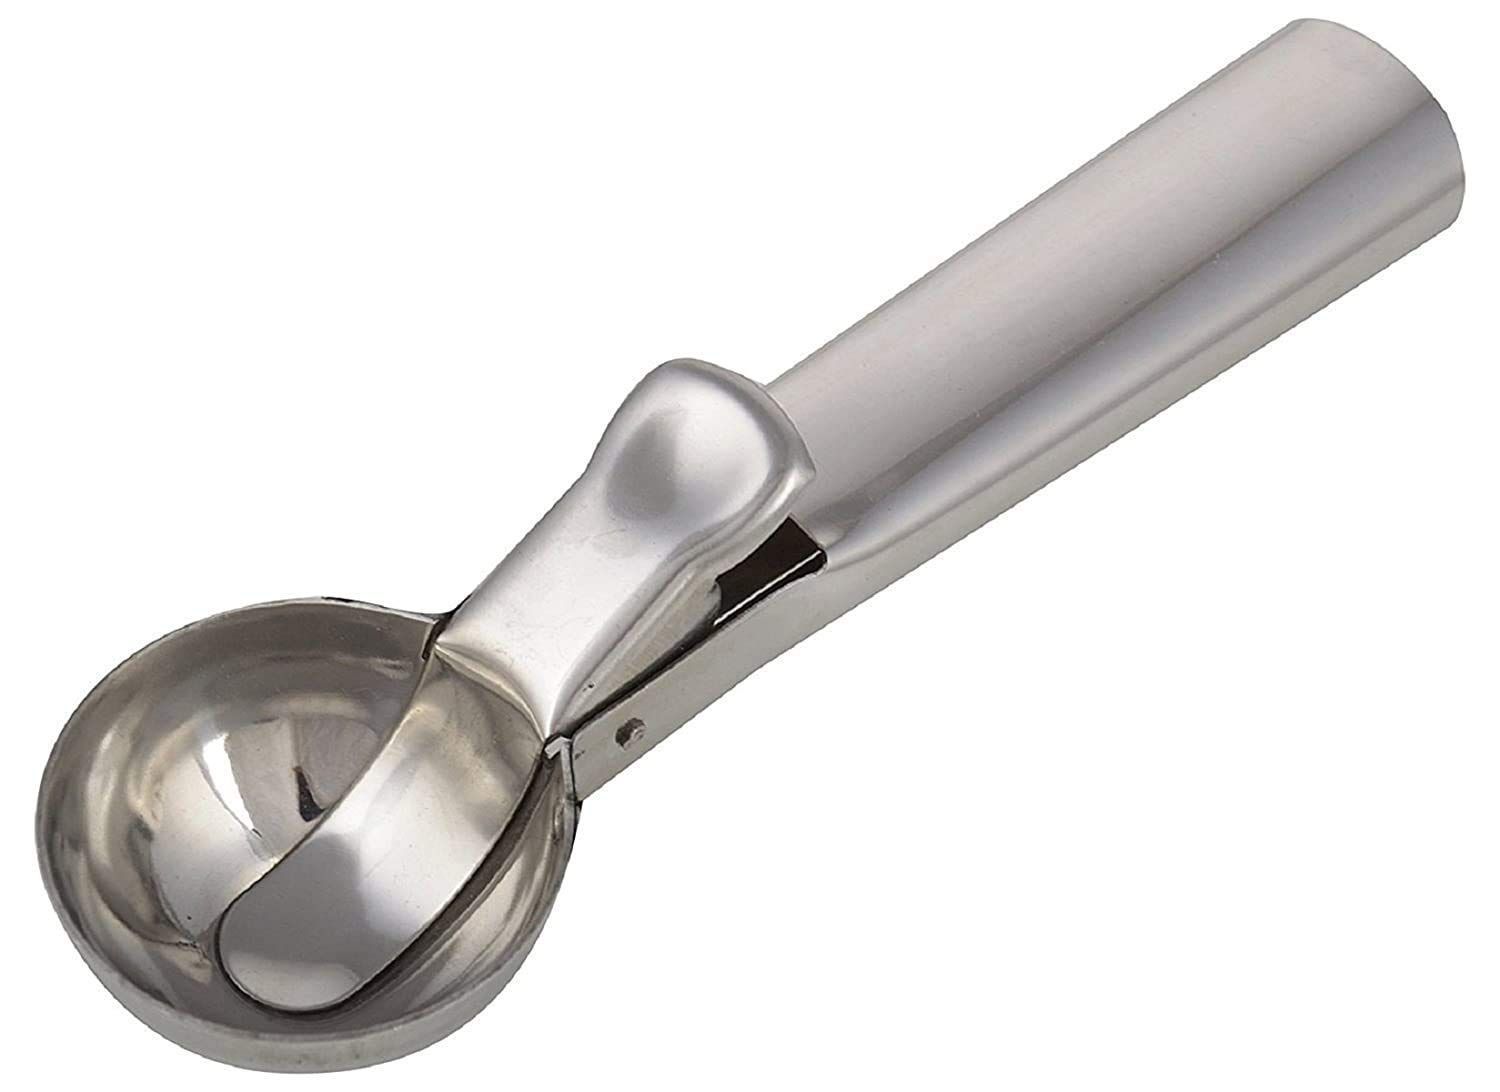  MGGi Stainless Steel Ice Cream Scooper with Trigger